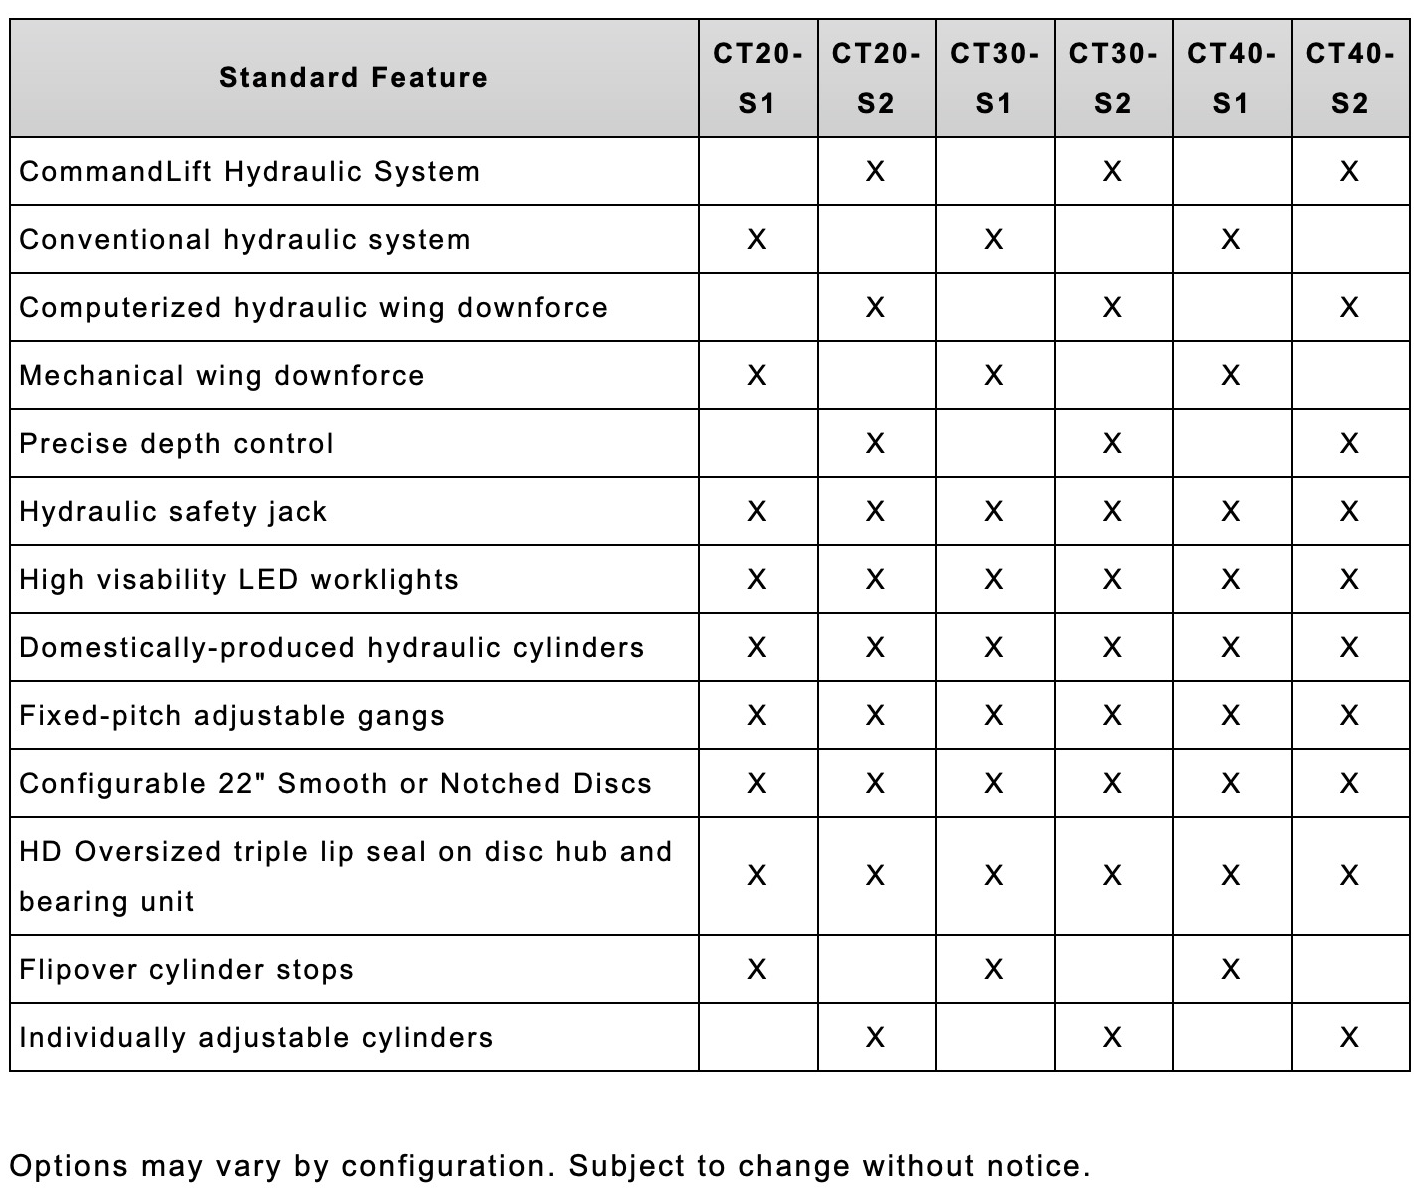 Standard Features by Series